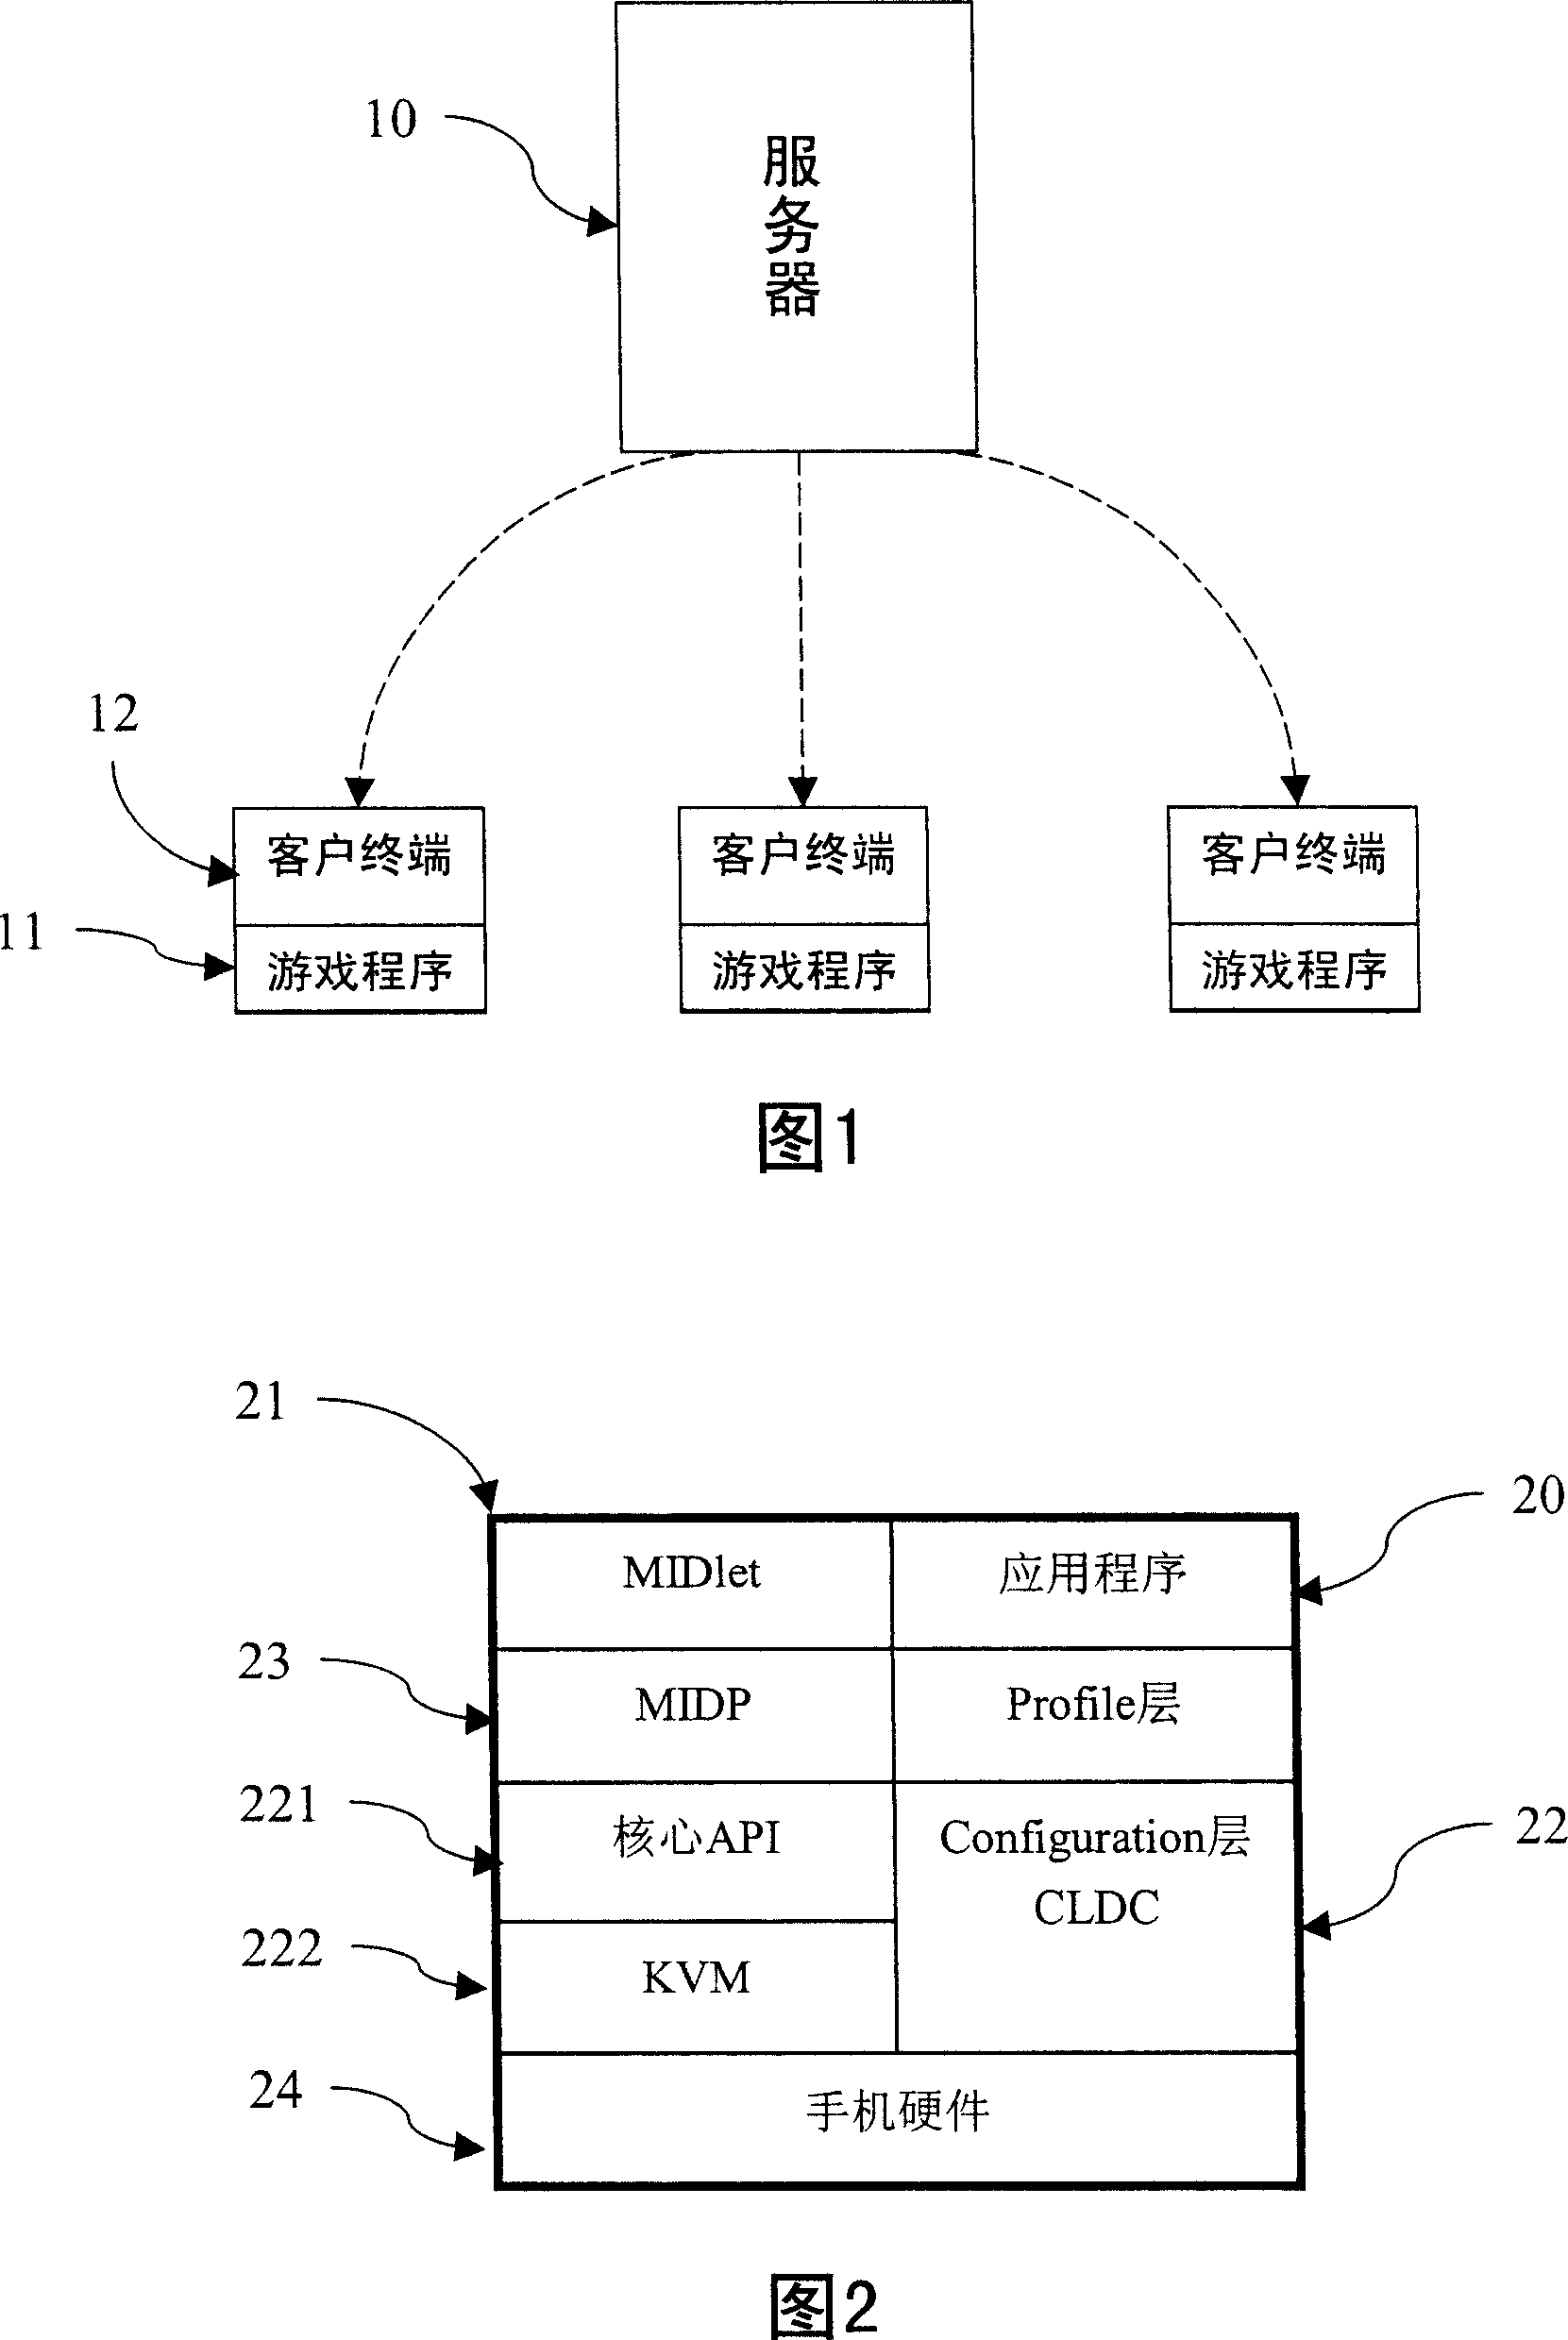 Method for displaying chat information on mobile terminal networking game interface